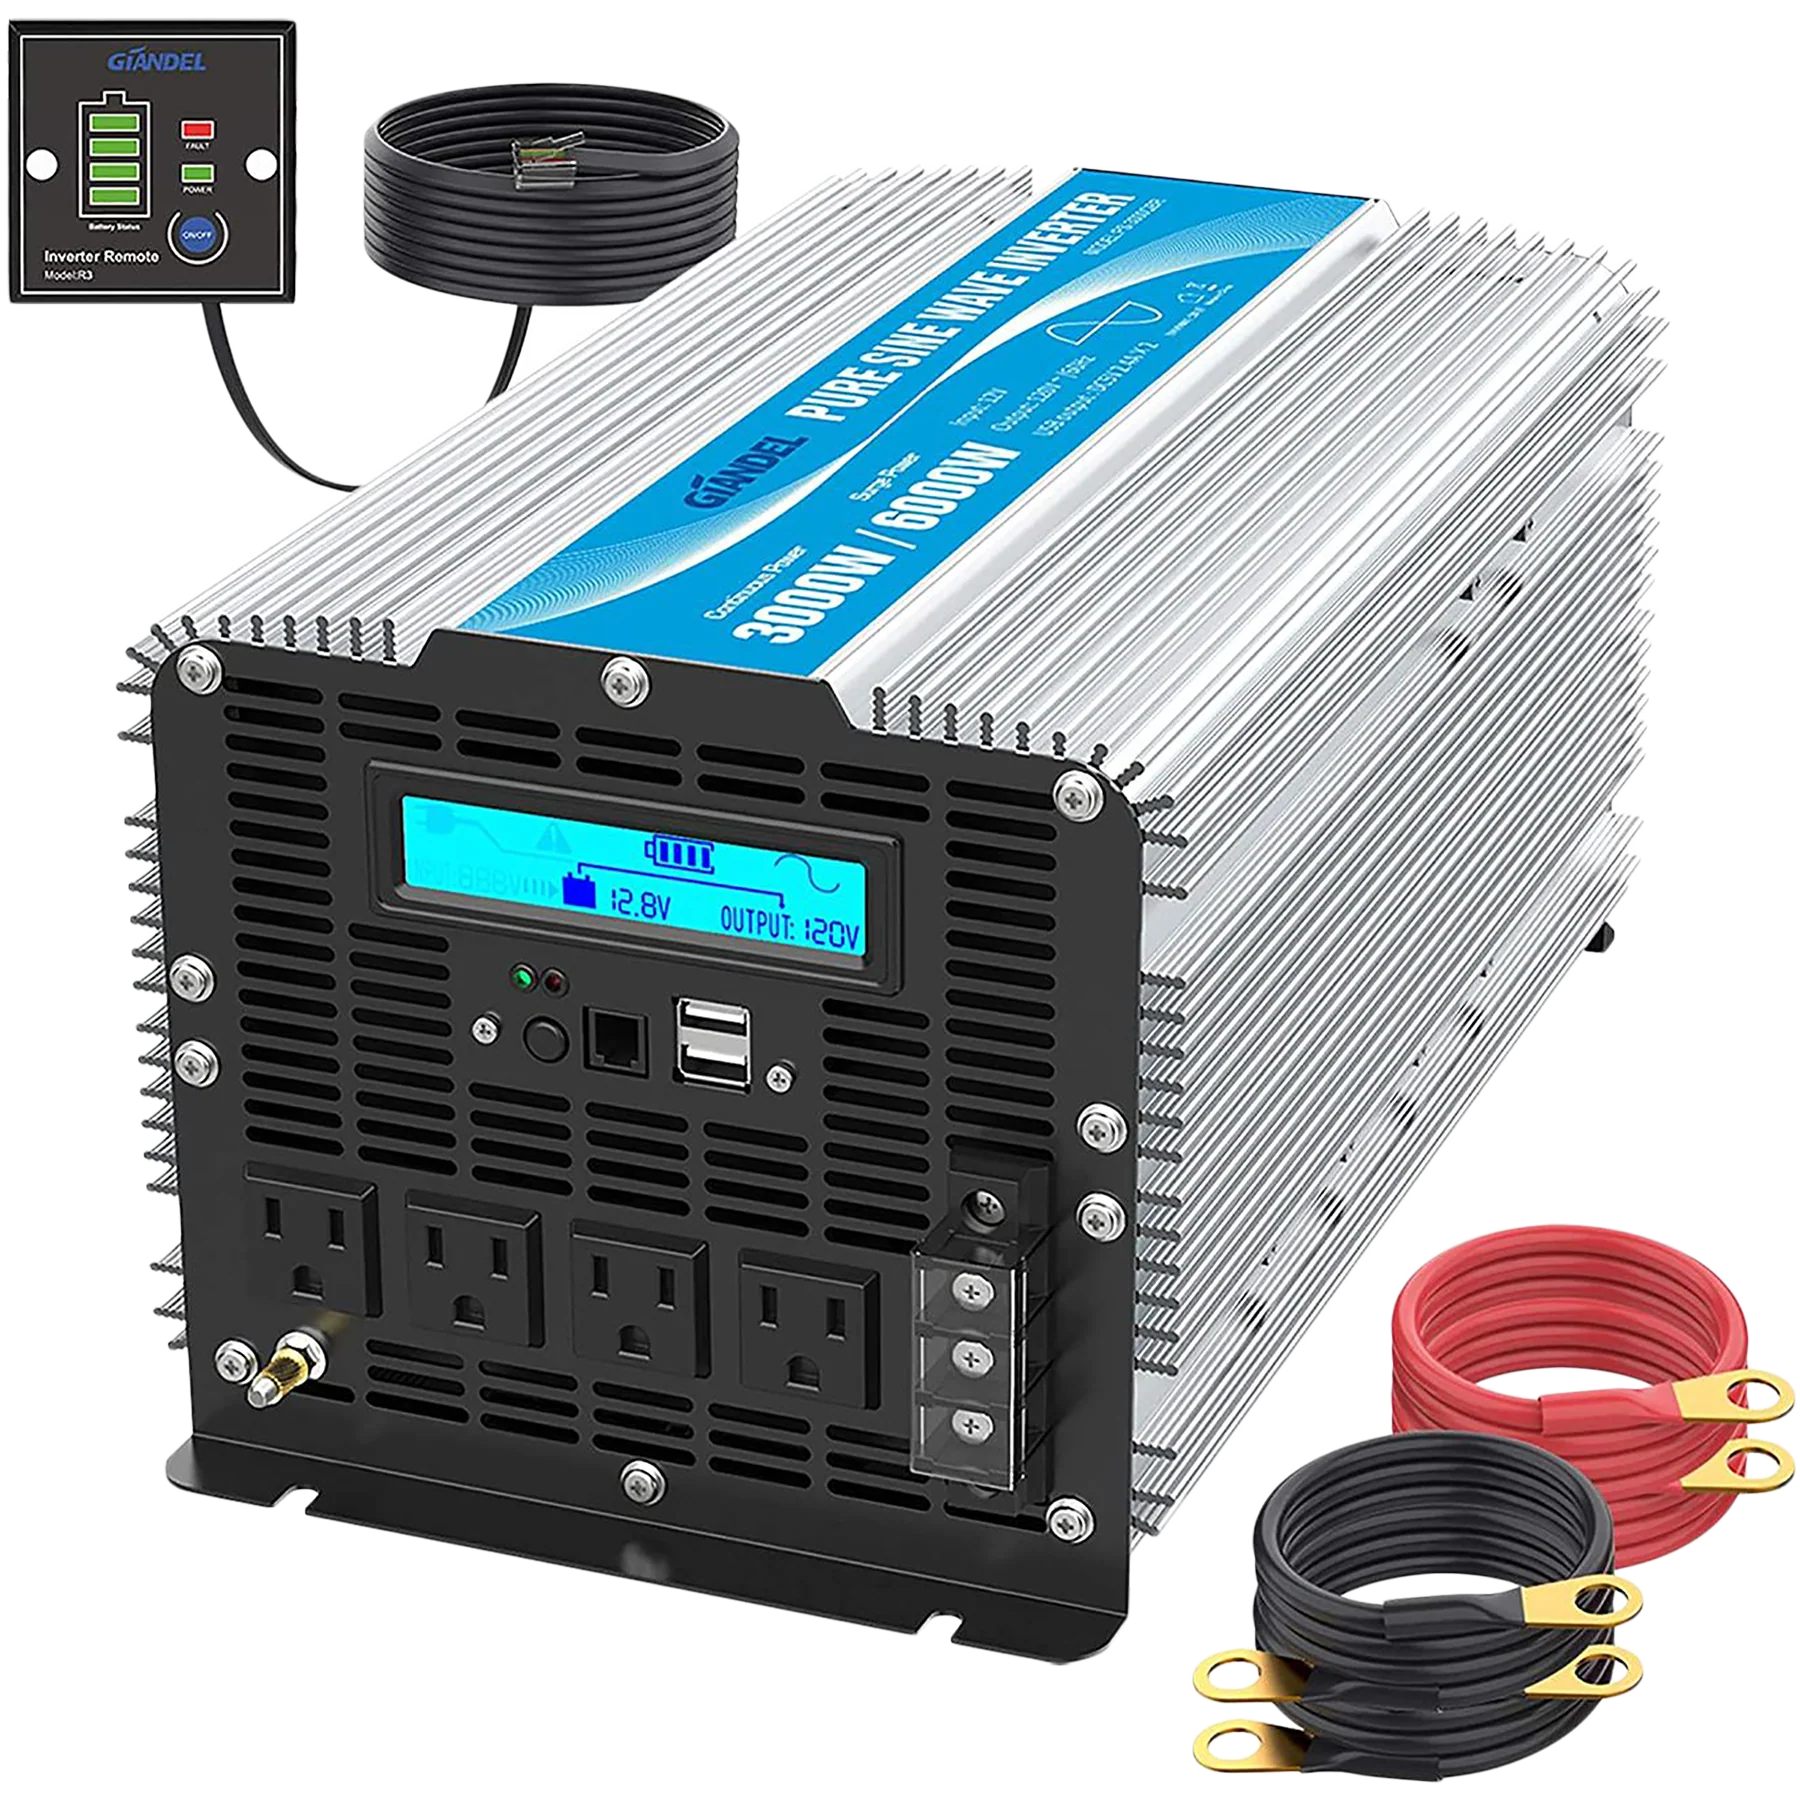 A picture of a 3000W 12V pure sine wave inverter with AC power and DC power outputs connected to a battery and electrical system, with AC outlets and additional features